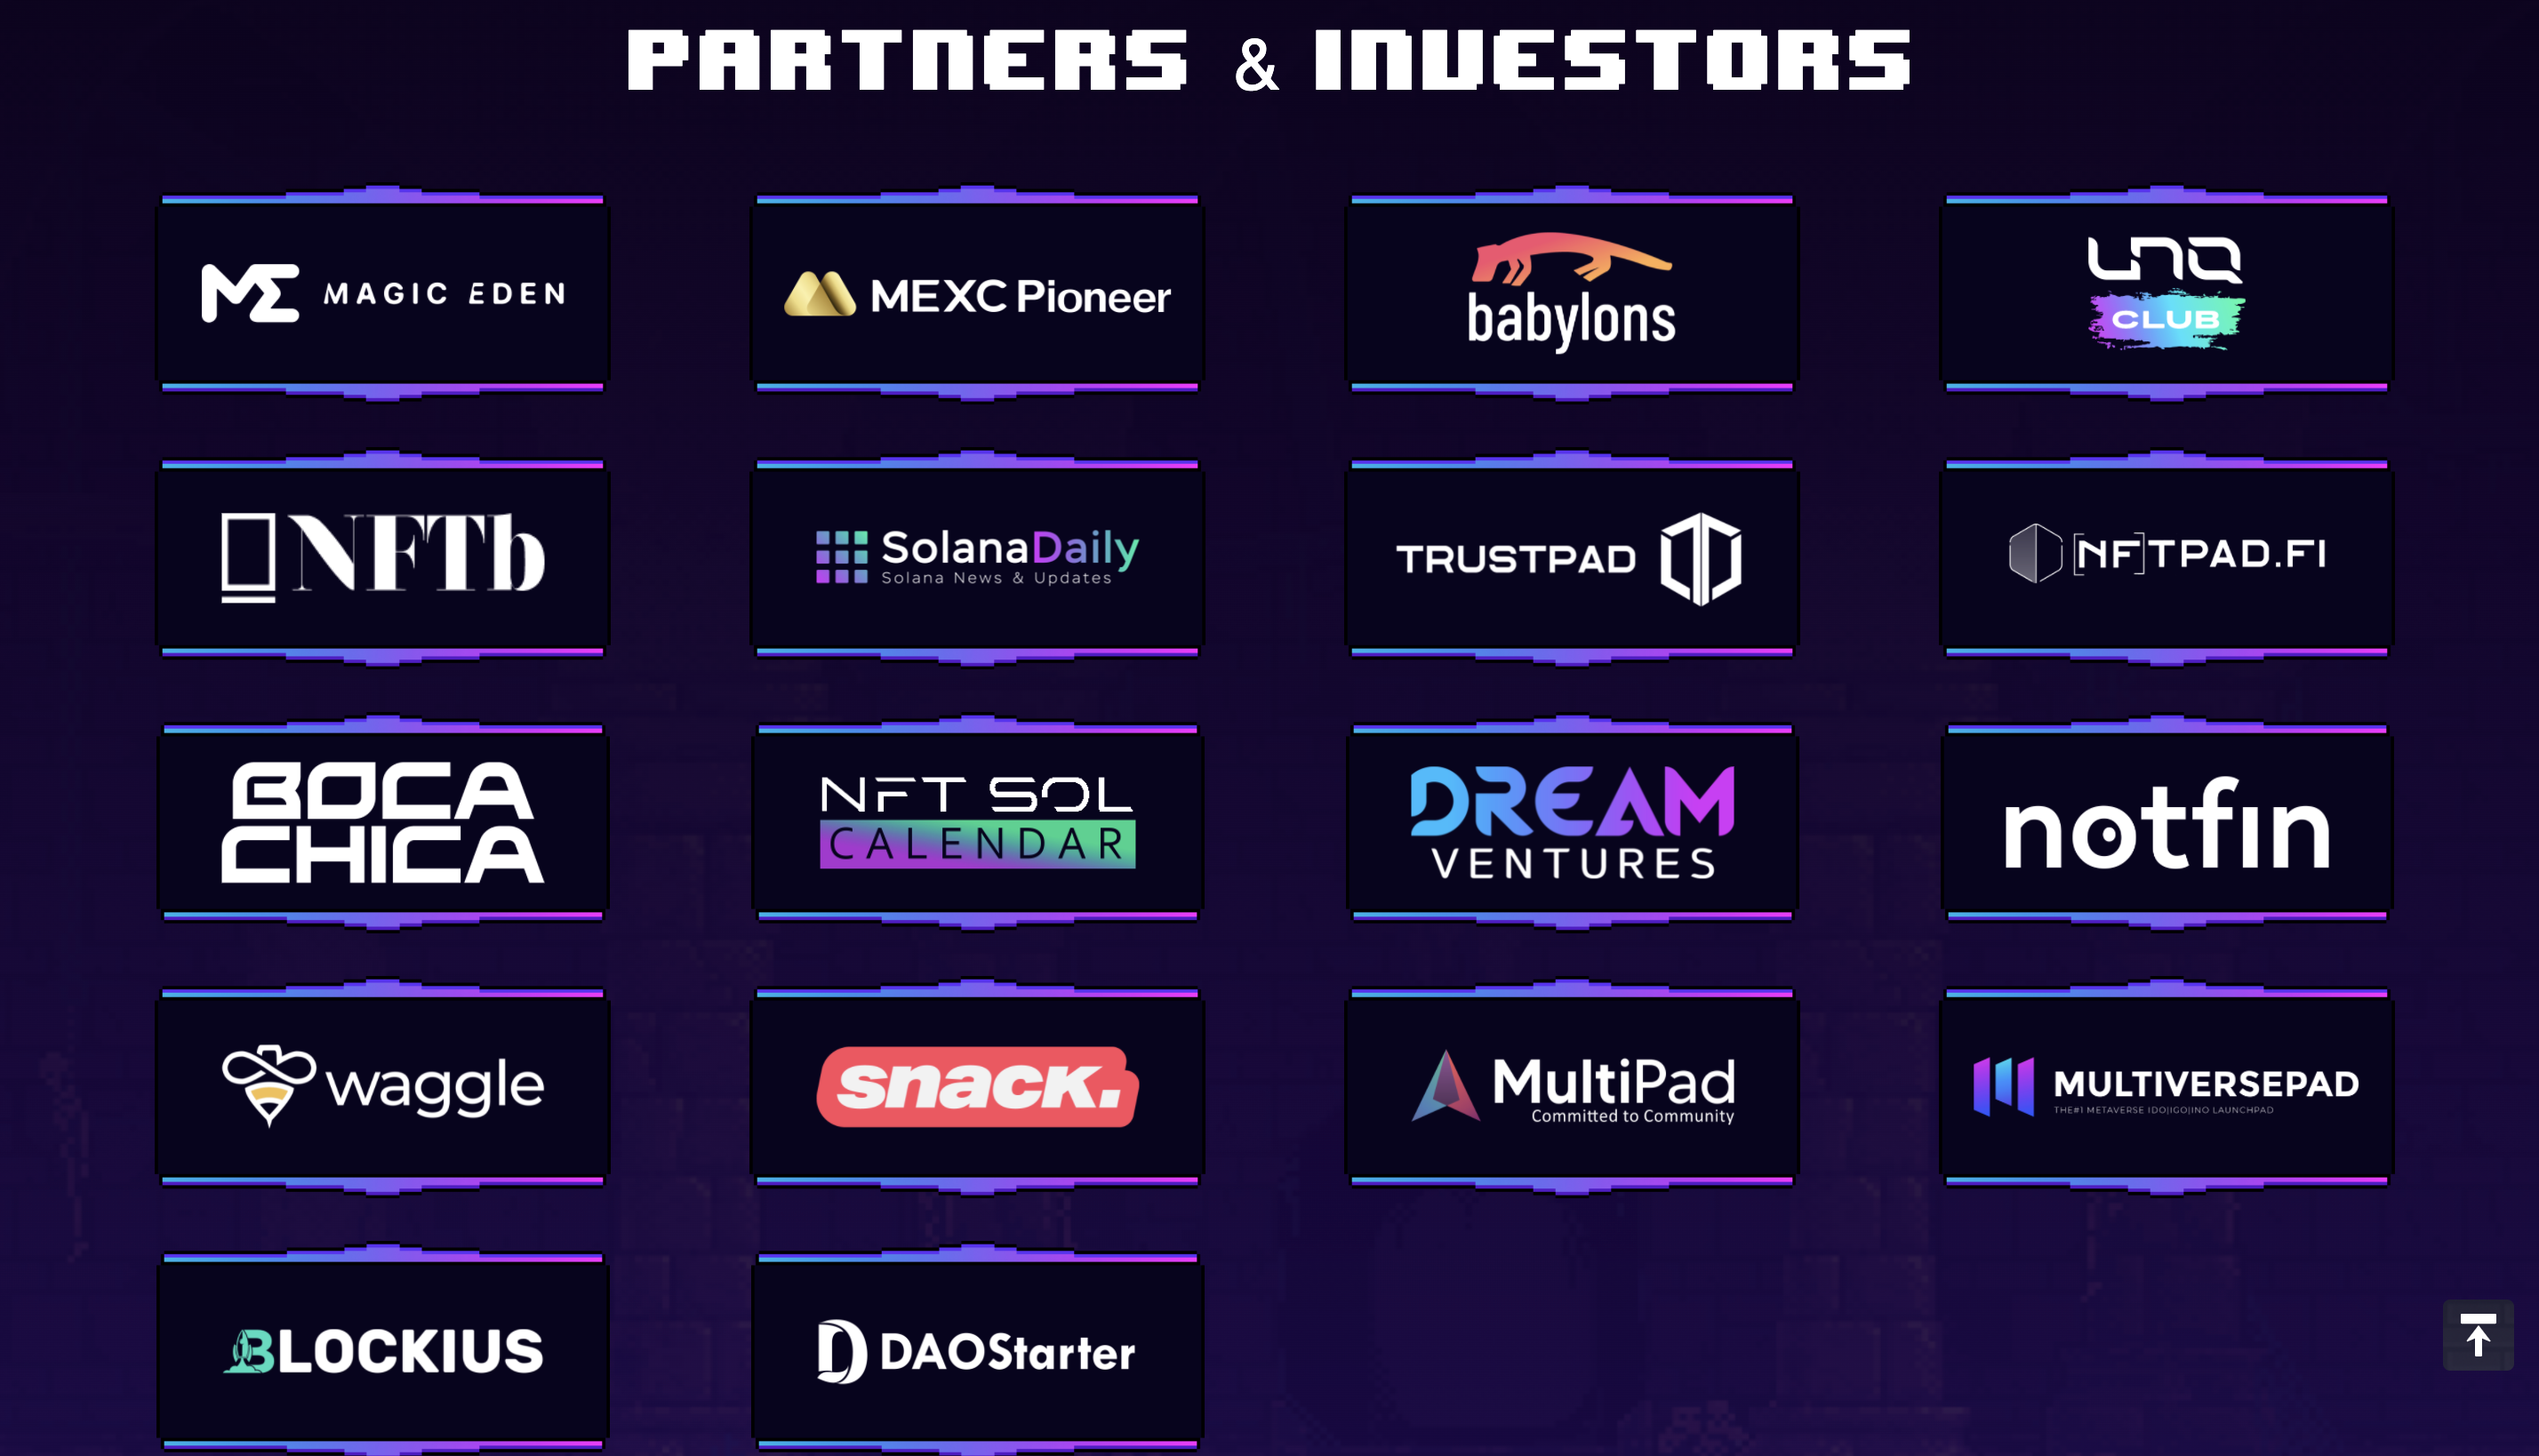 Dead Knight Partners and Investors